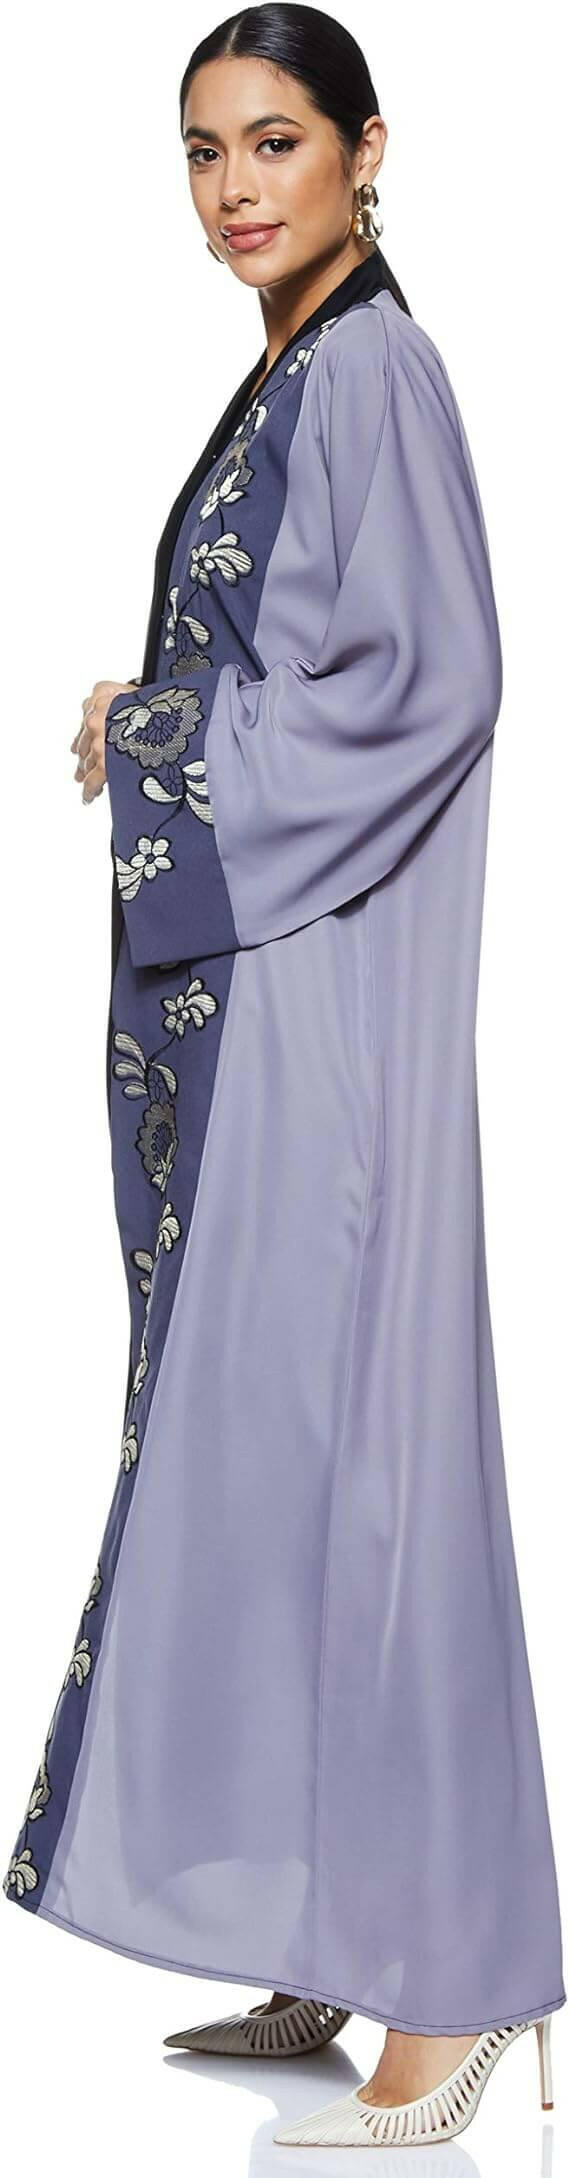 Women's Abaya With Floral Embroidery.Abaya Comes With Matching Hijab Ethnic Wear